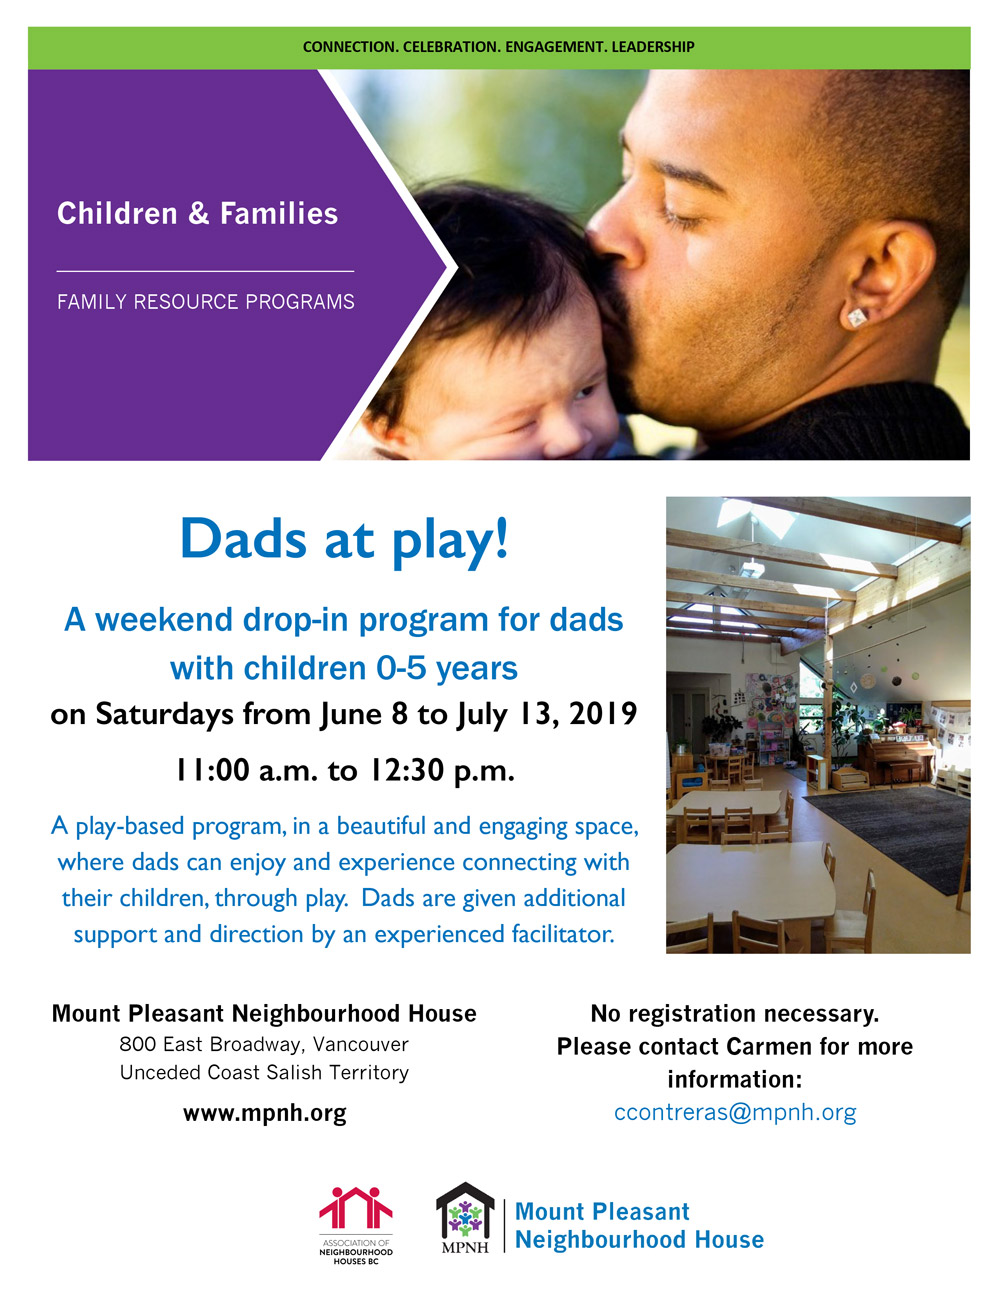 An image of the poster with program details, featuring a photo of a dad kissing his baby's head, and a photo of the preschool gathering space.